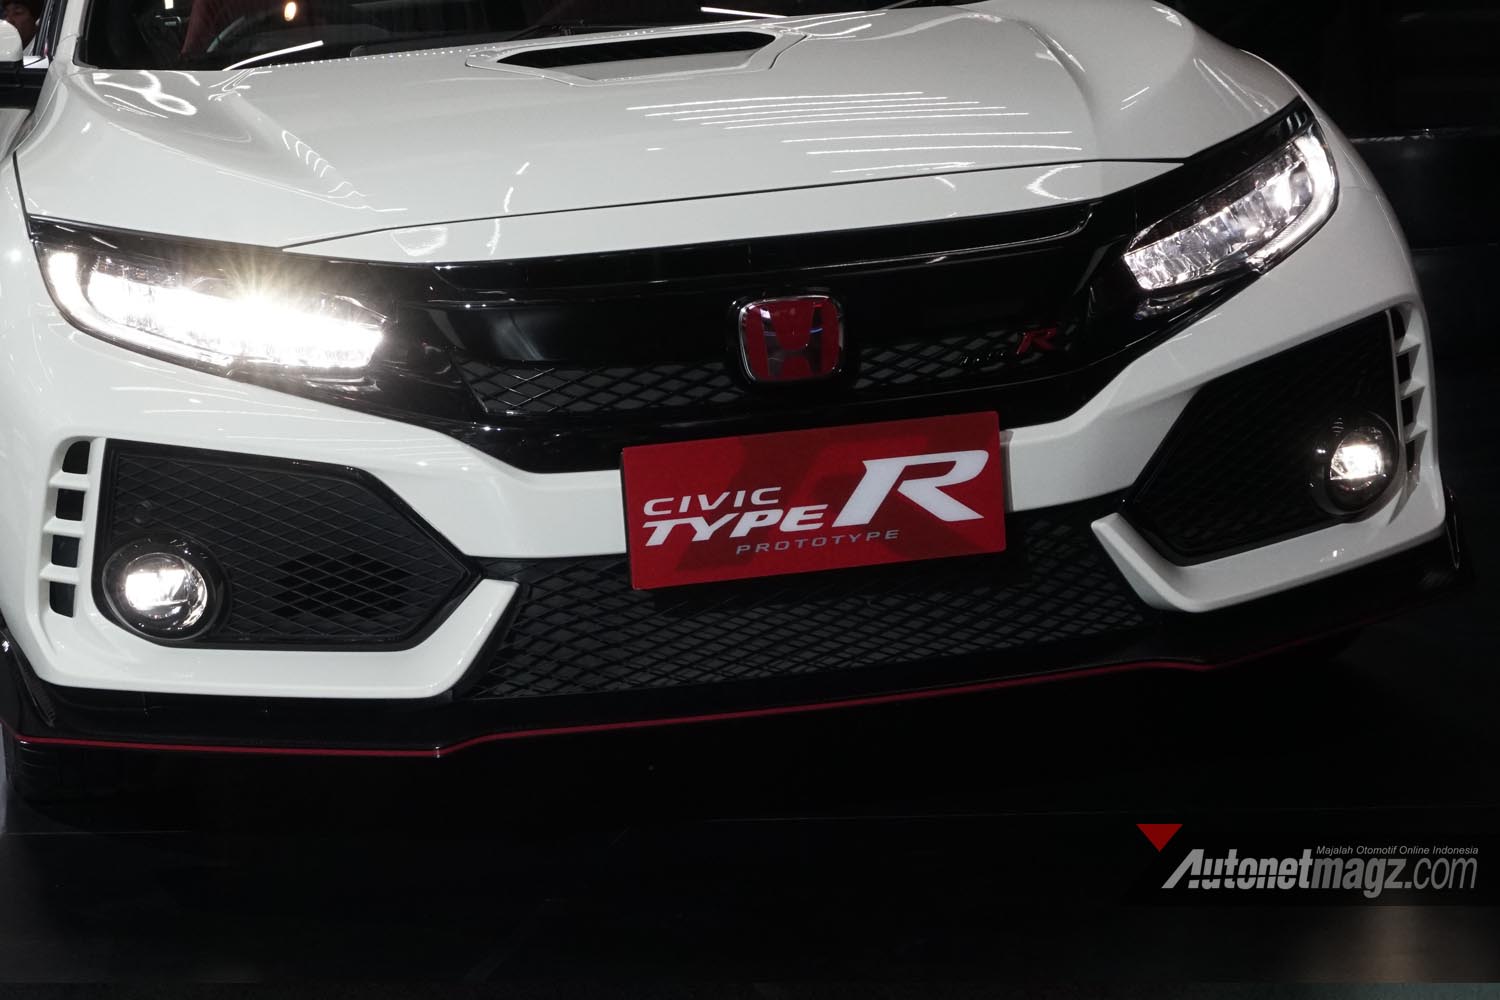 GIIAS 2017, honda civic type r indonesia giias 2017 front end: First Impression Review Honda Civic Type R 2017 Indonesia